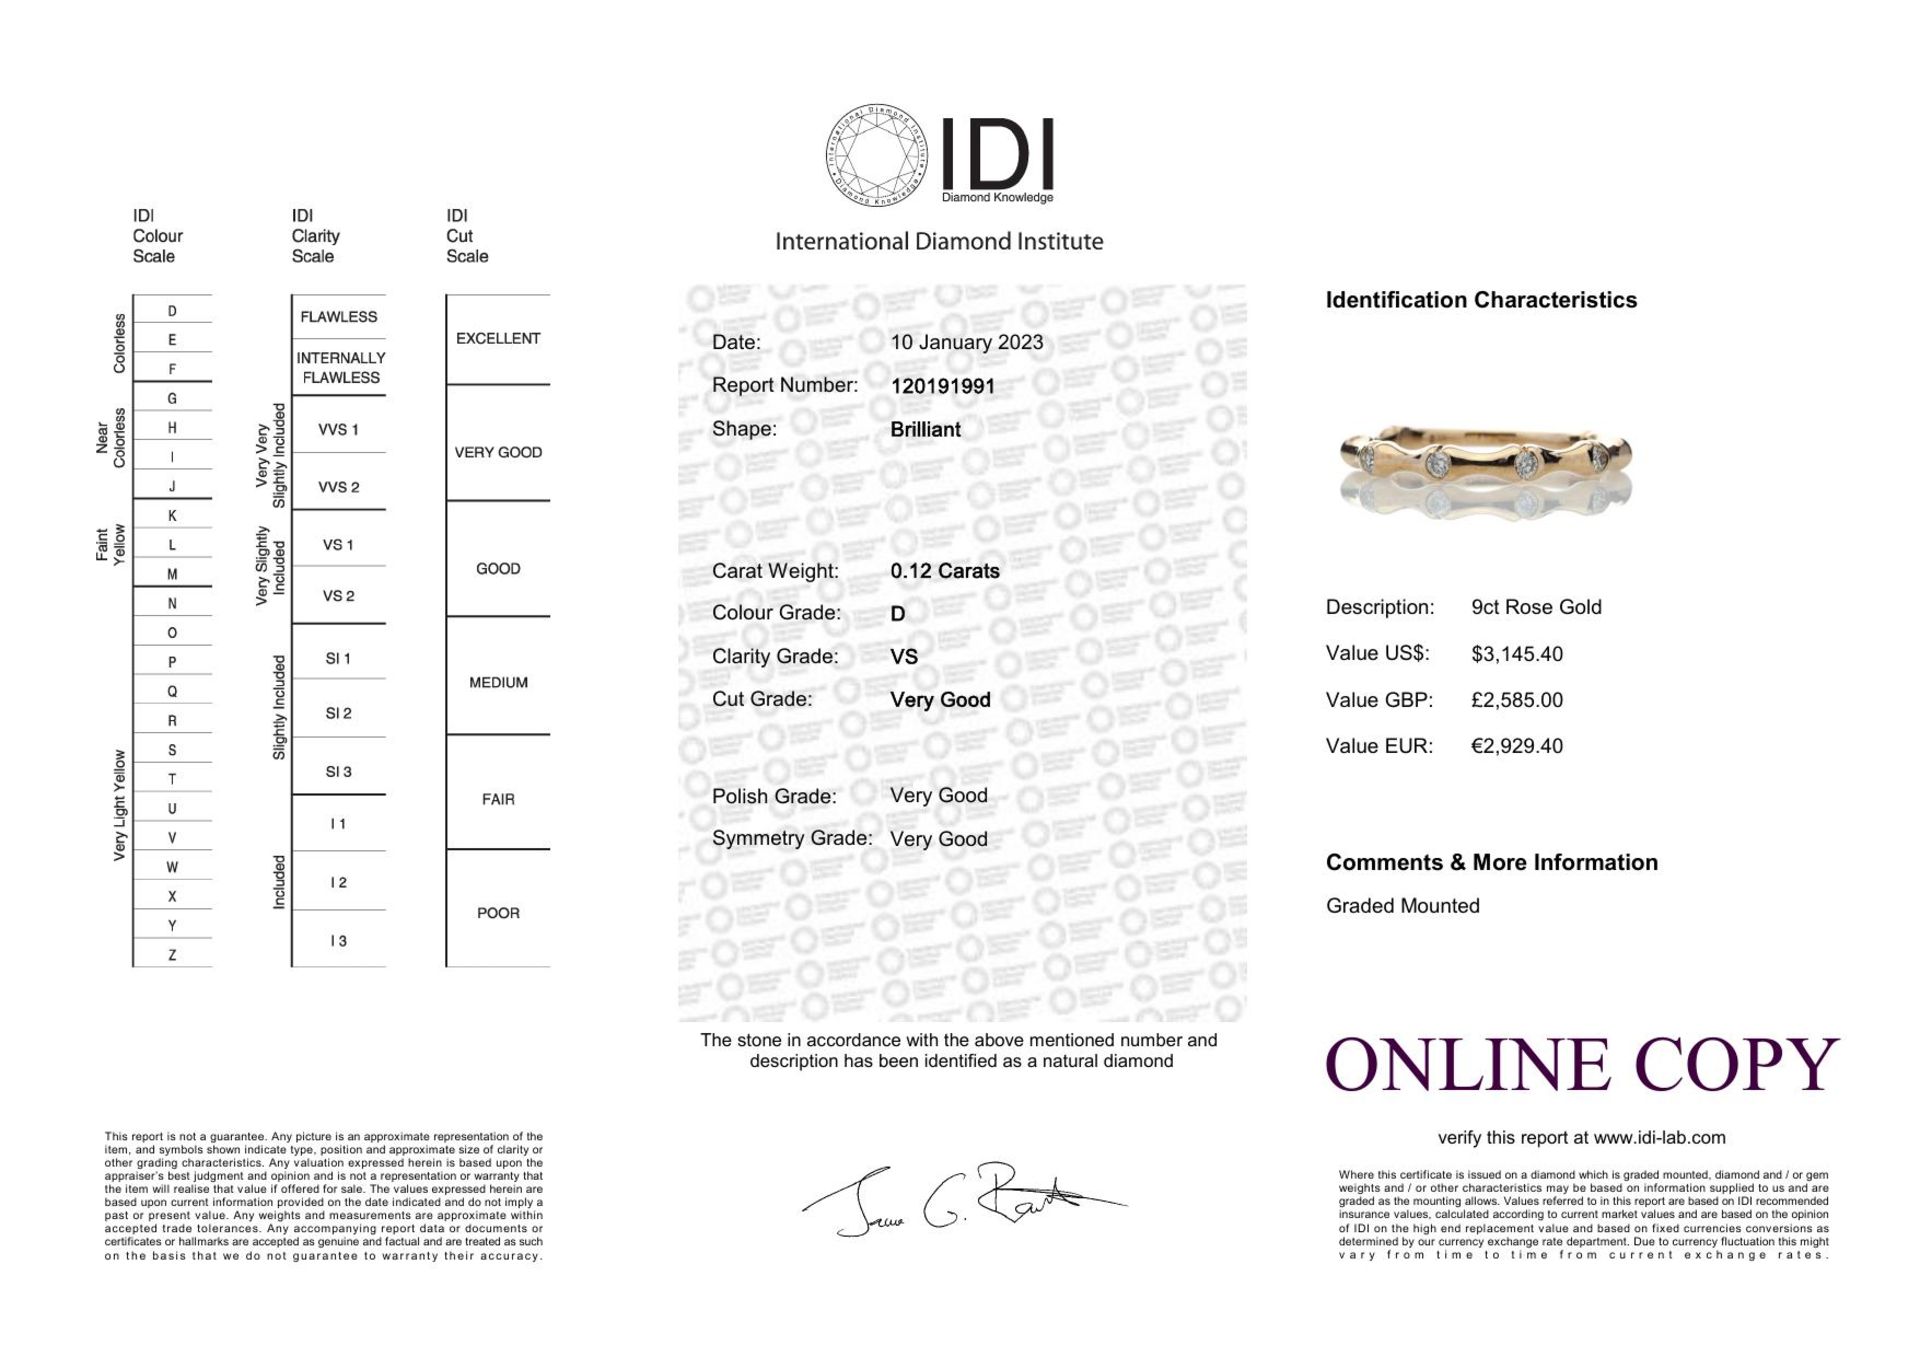 9ct Rose Gold Diamond Ring 0.12 Carats - Valued By IDI £2,585.00 - Four round brilliant cut diamonds - Image 5 of 5